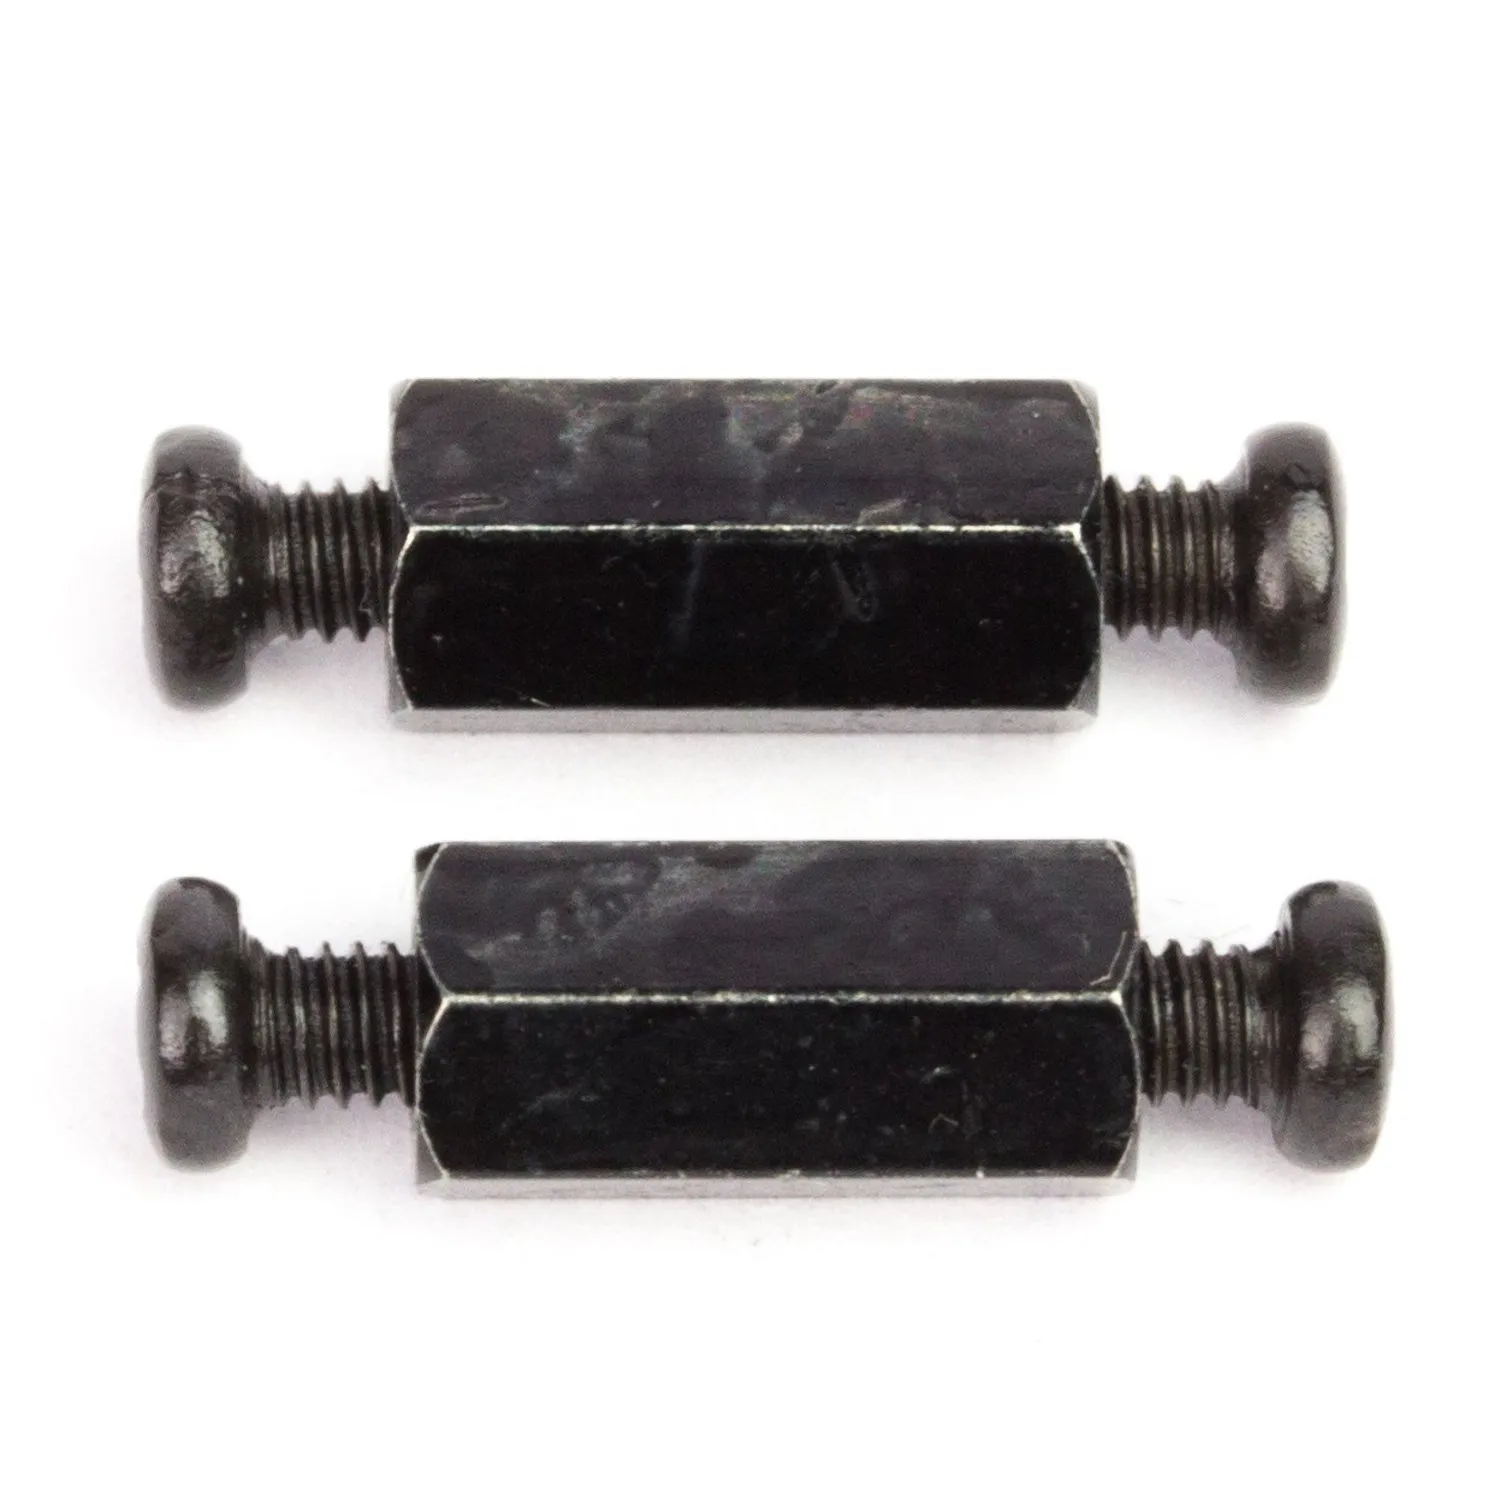 Photo of M2.5 Standoffs for Pi HATs - Black Plated - Pack of 2